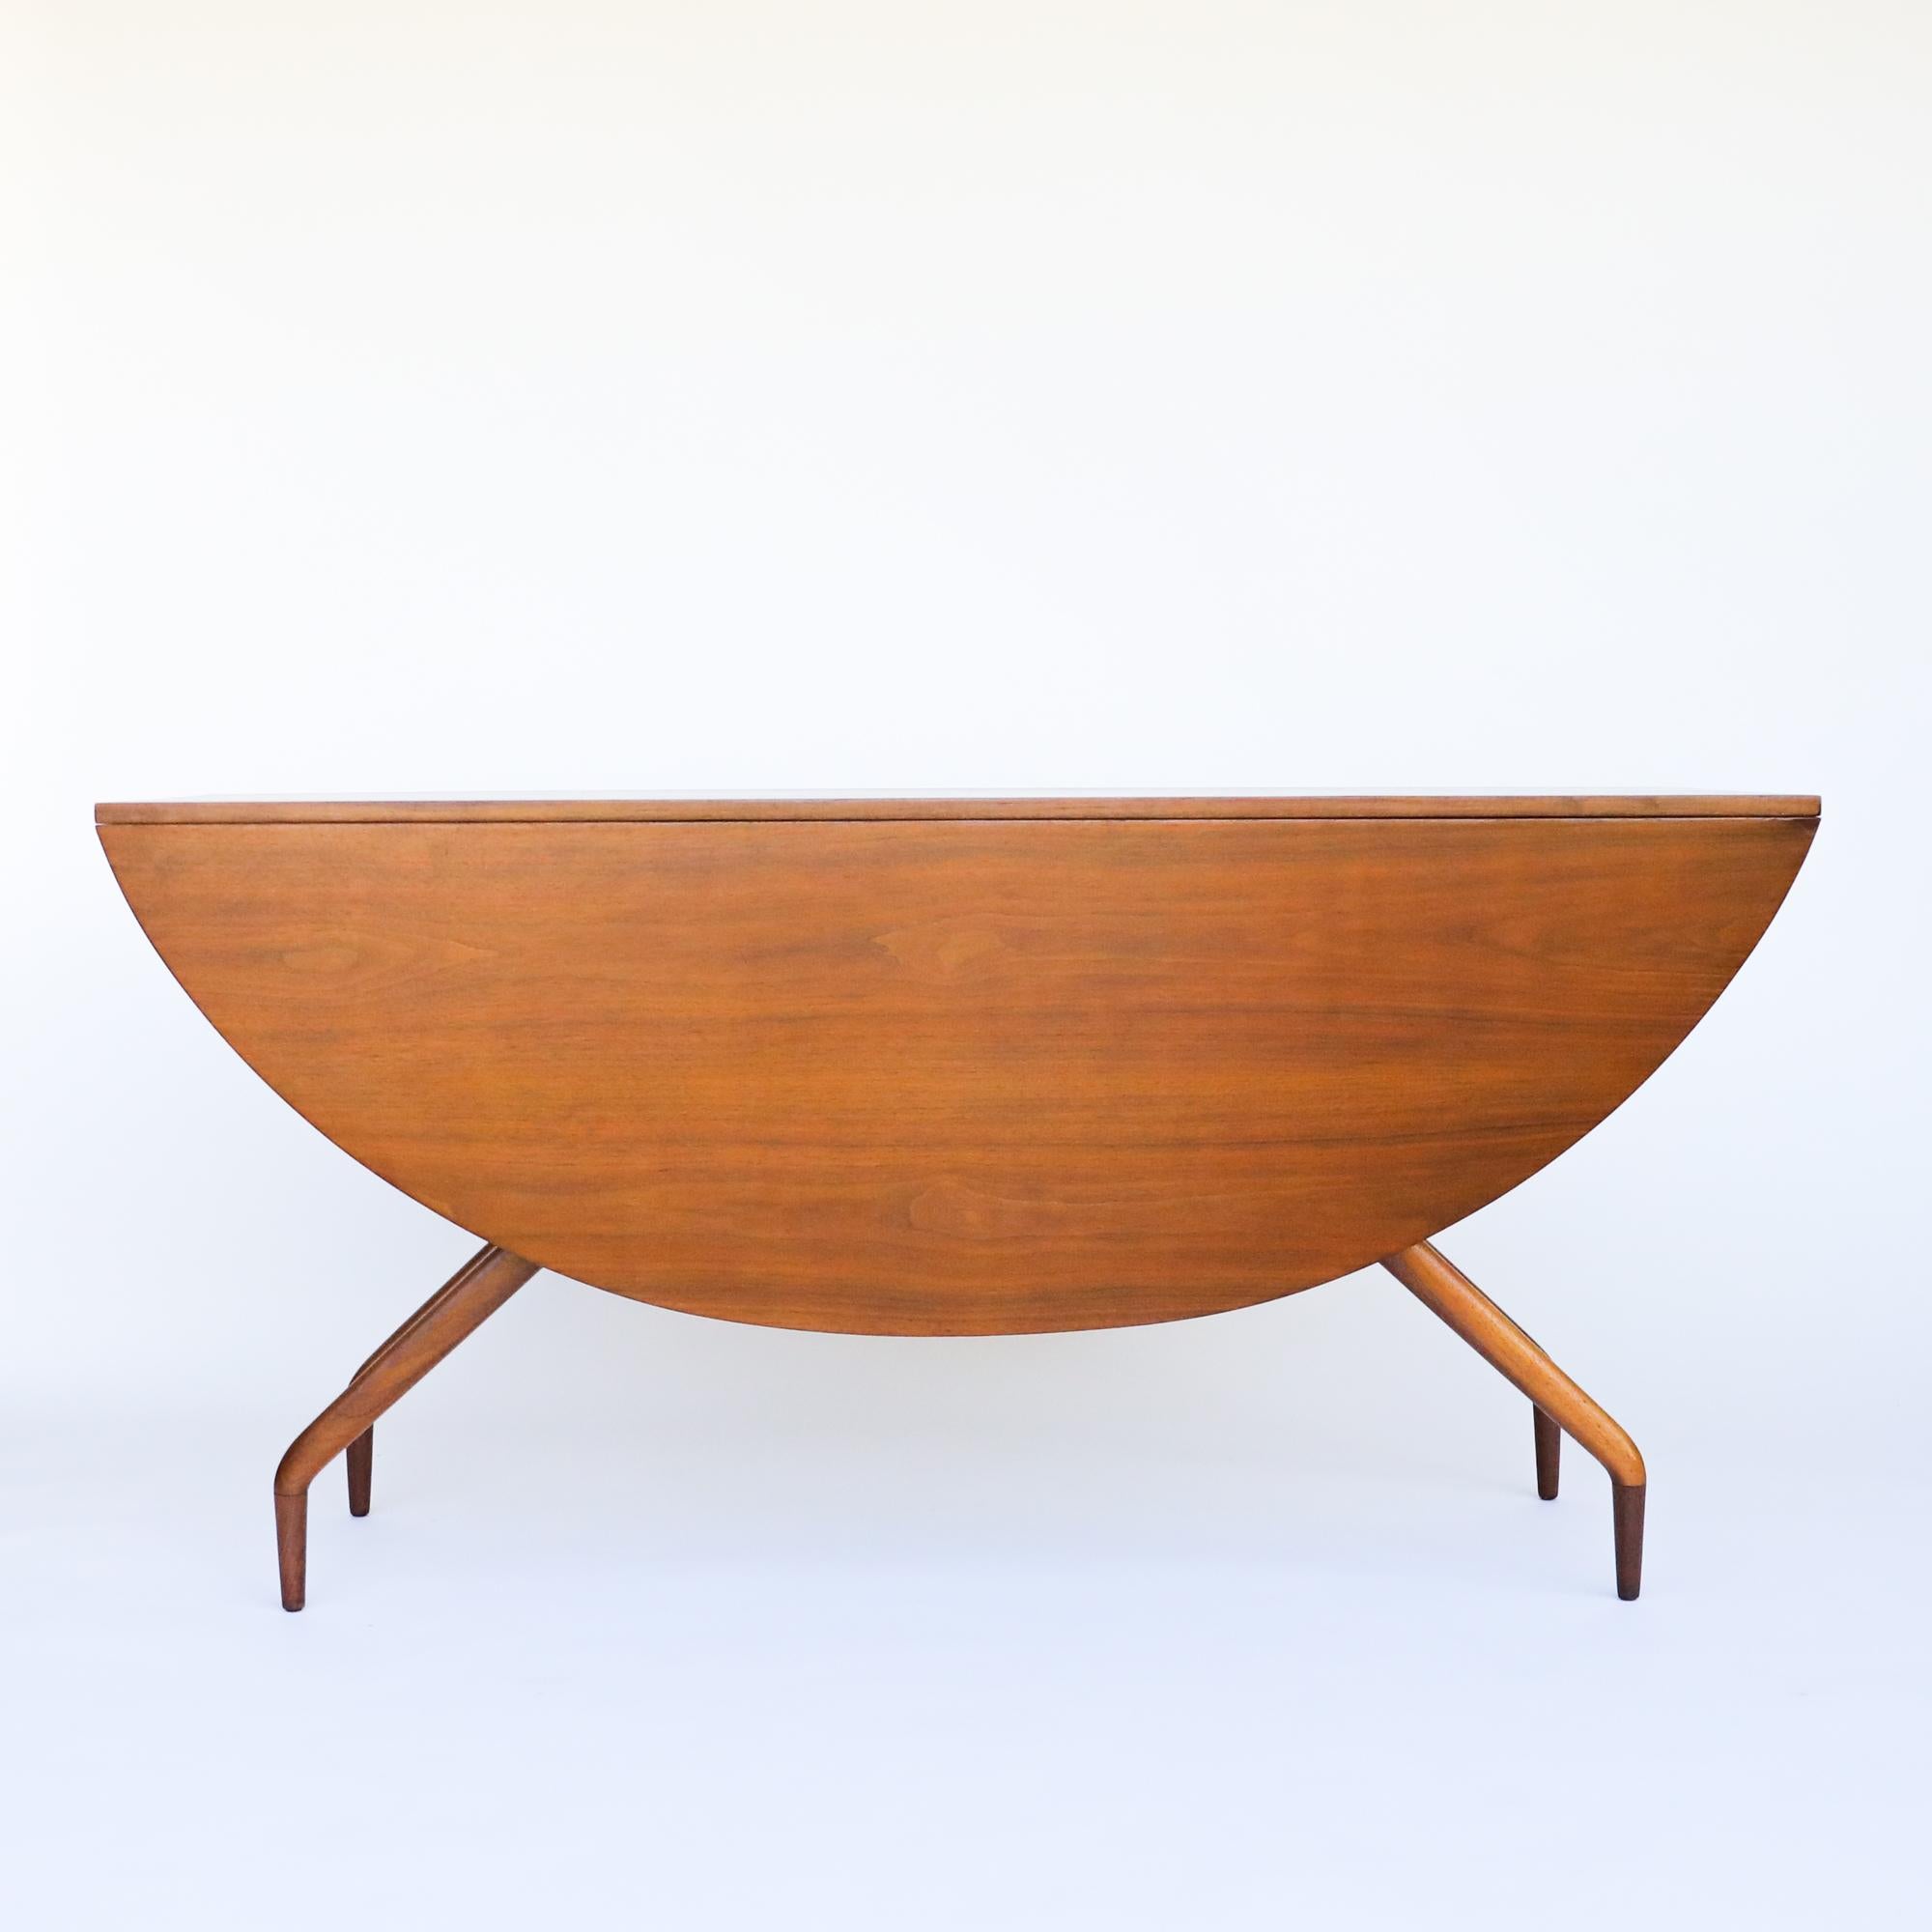 Mid-century modern “Spider” dining table designed by Ed Frank for Glenn of California, circa 1950s. It is often attributed to Greta Grossman as it has  sleek lines and slender proportions. The table is made from walnut and the grain is gorgeous. The